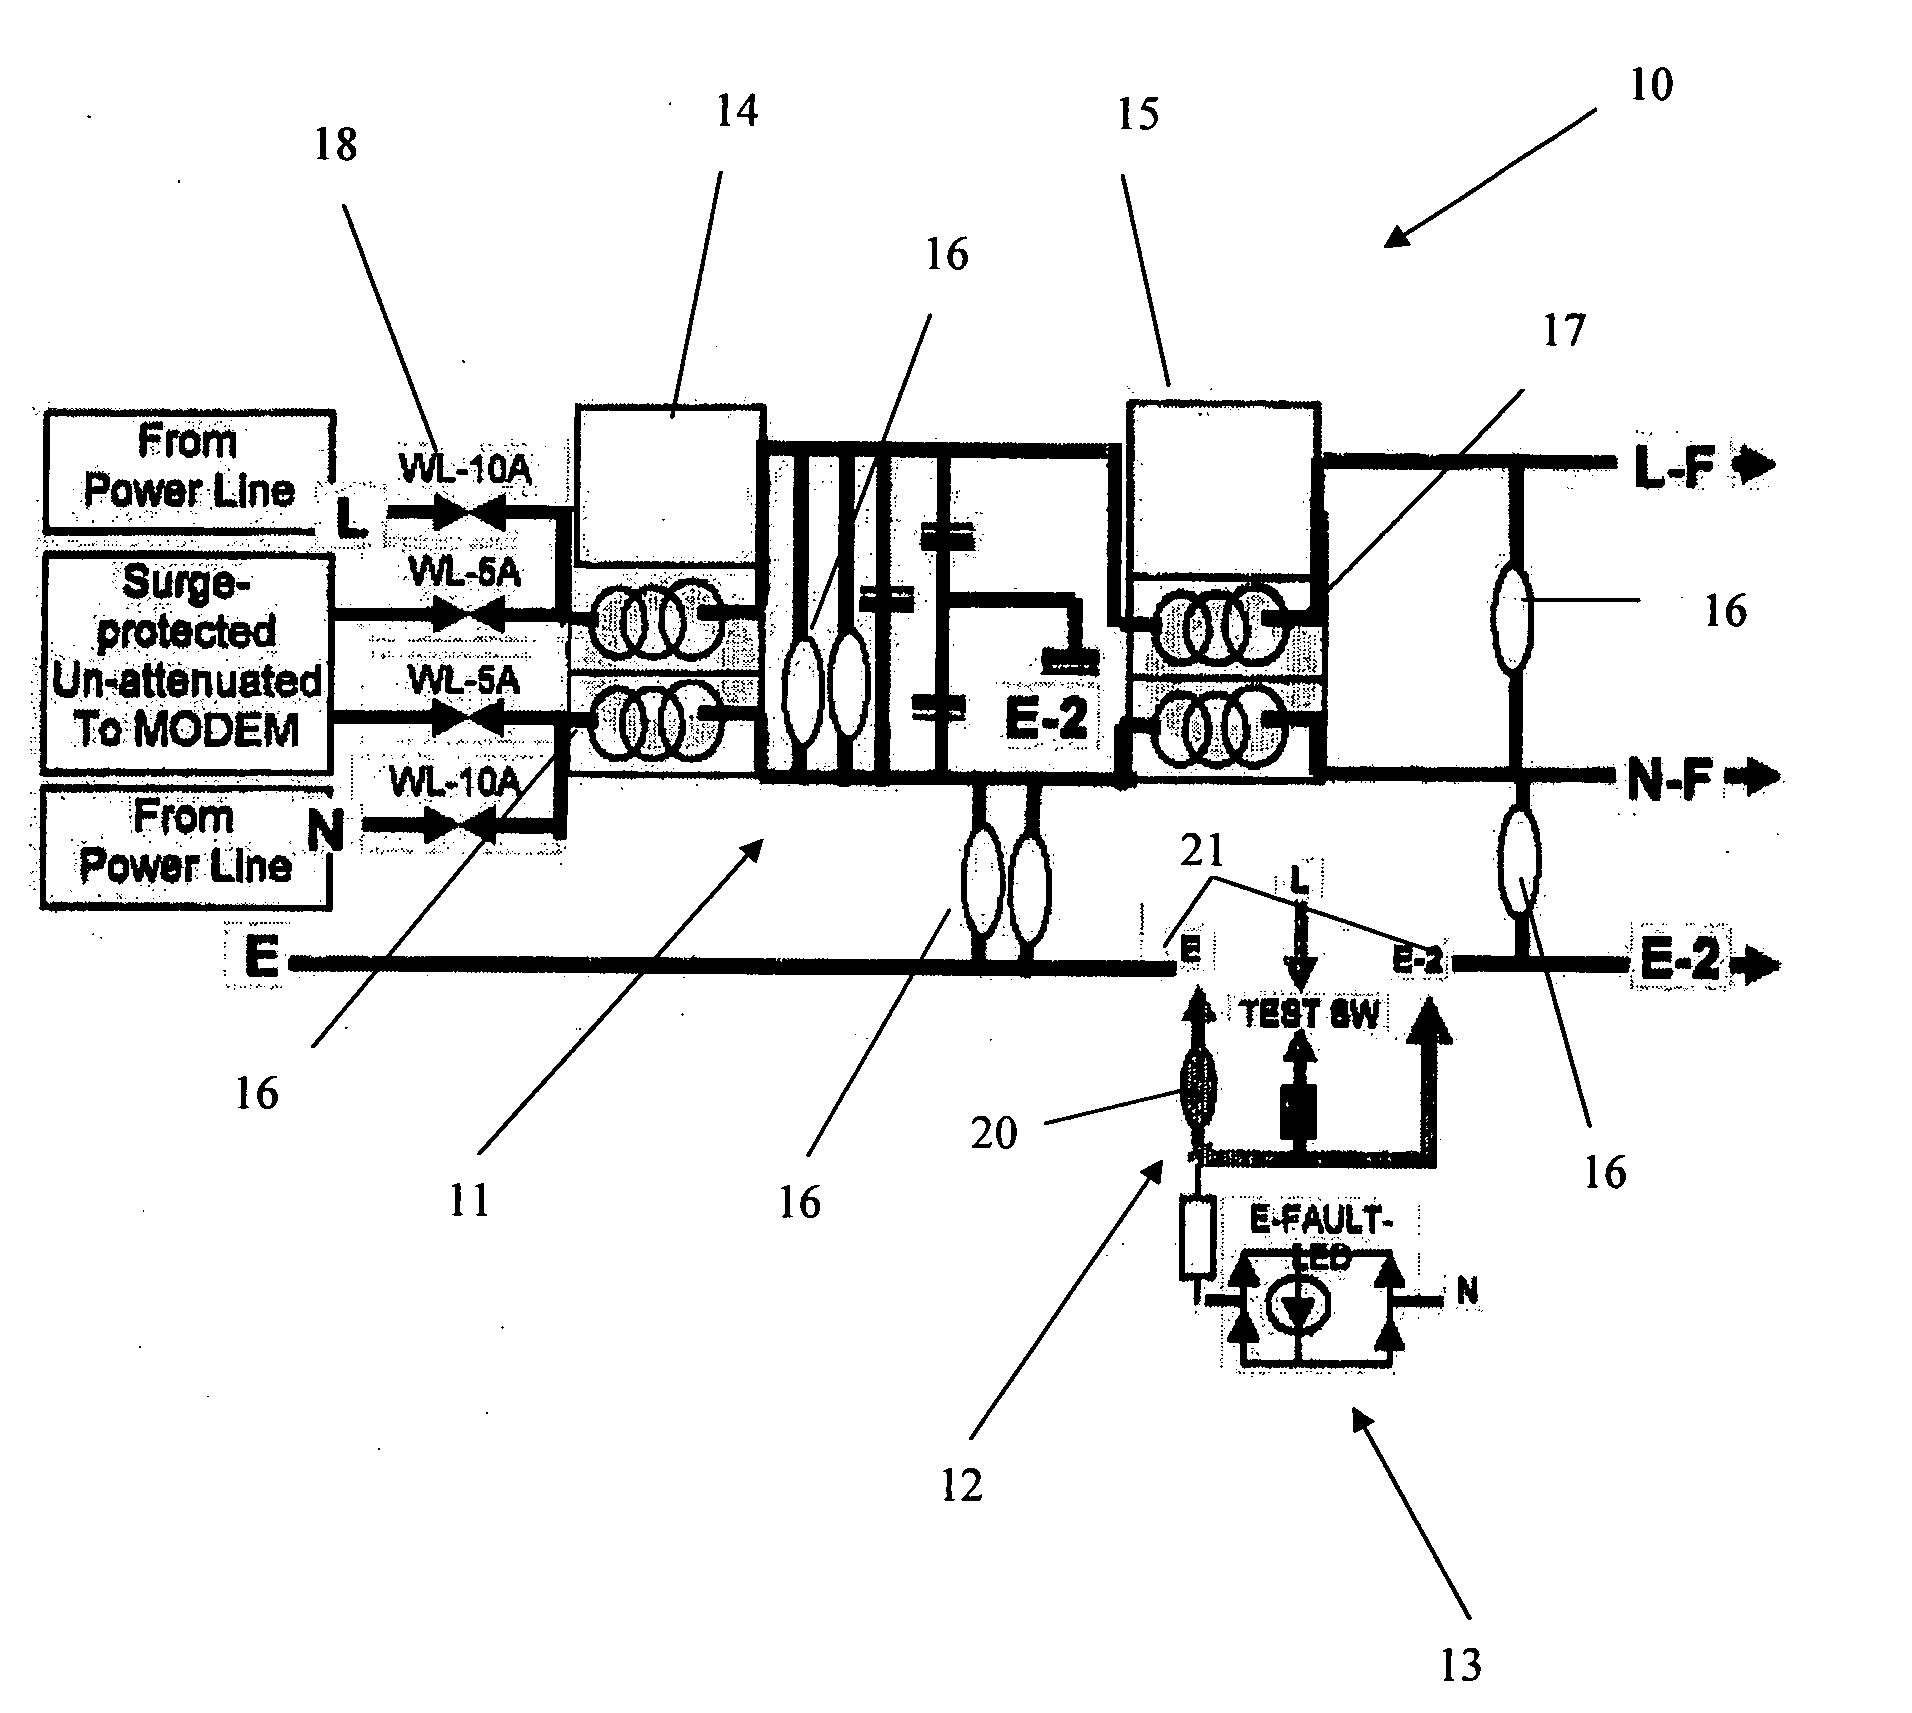 Electrical interface protecting apparatus